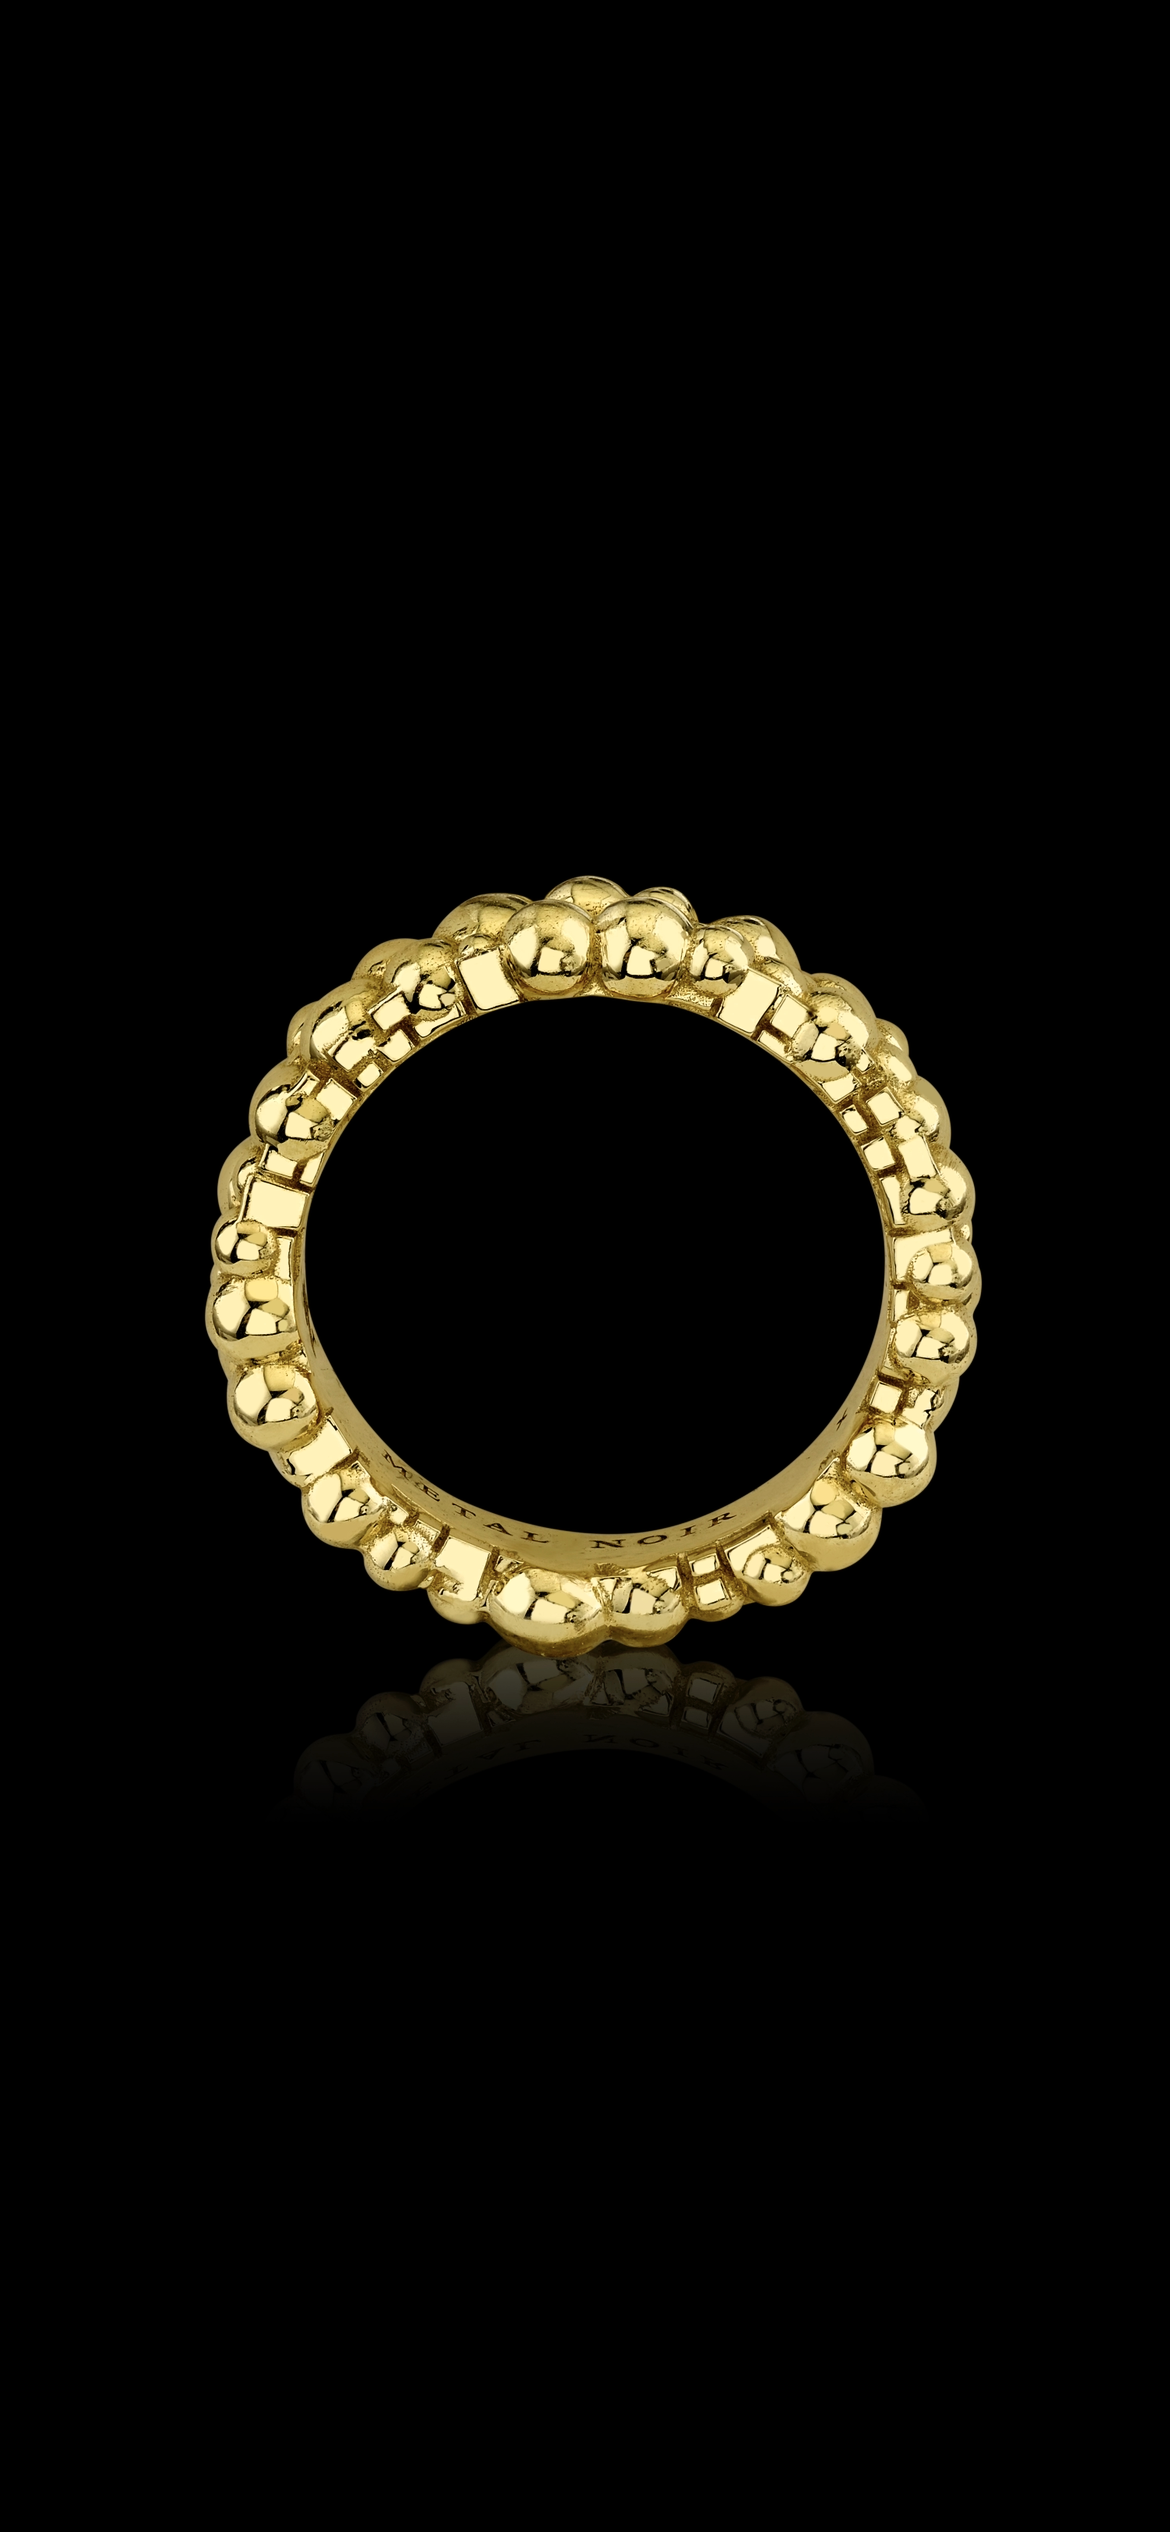 Signature Collection ‘Ceulaer’ Concept Ring